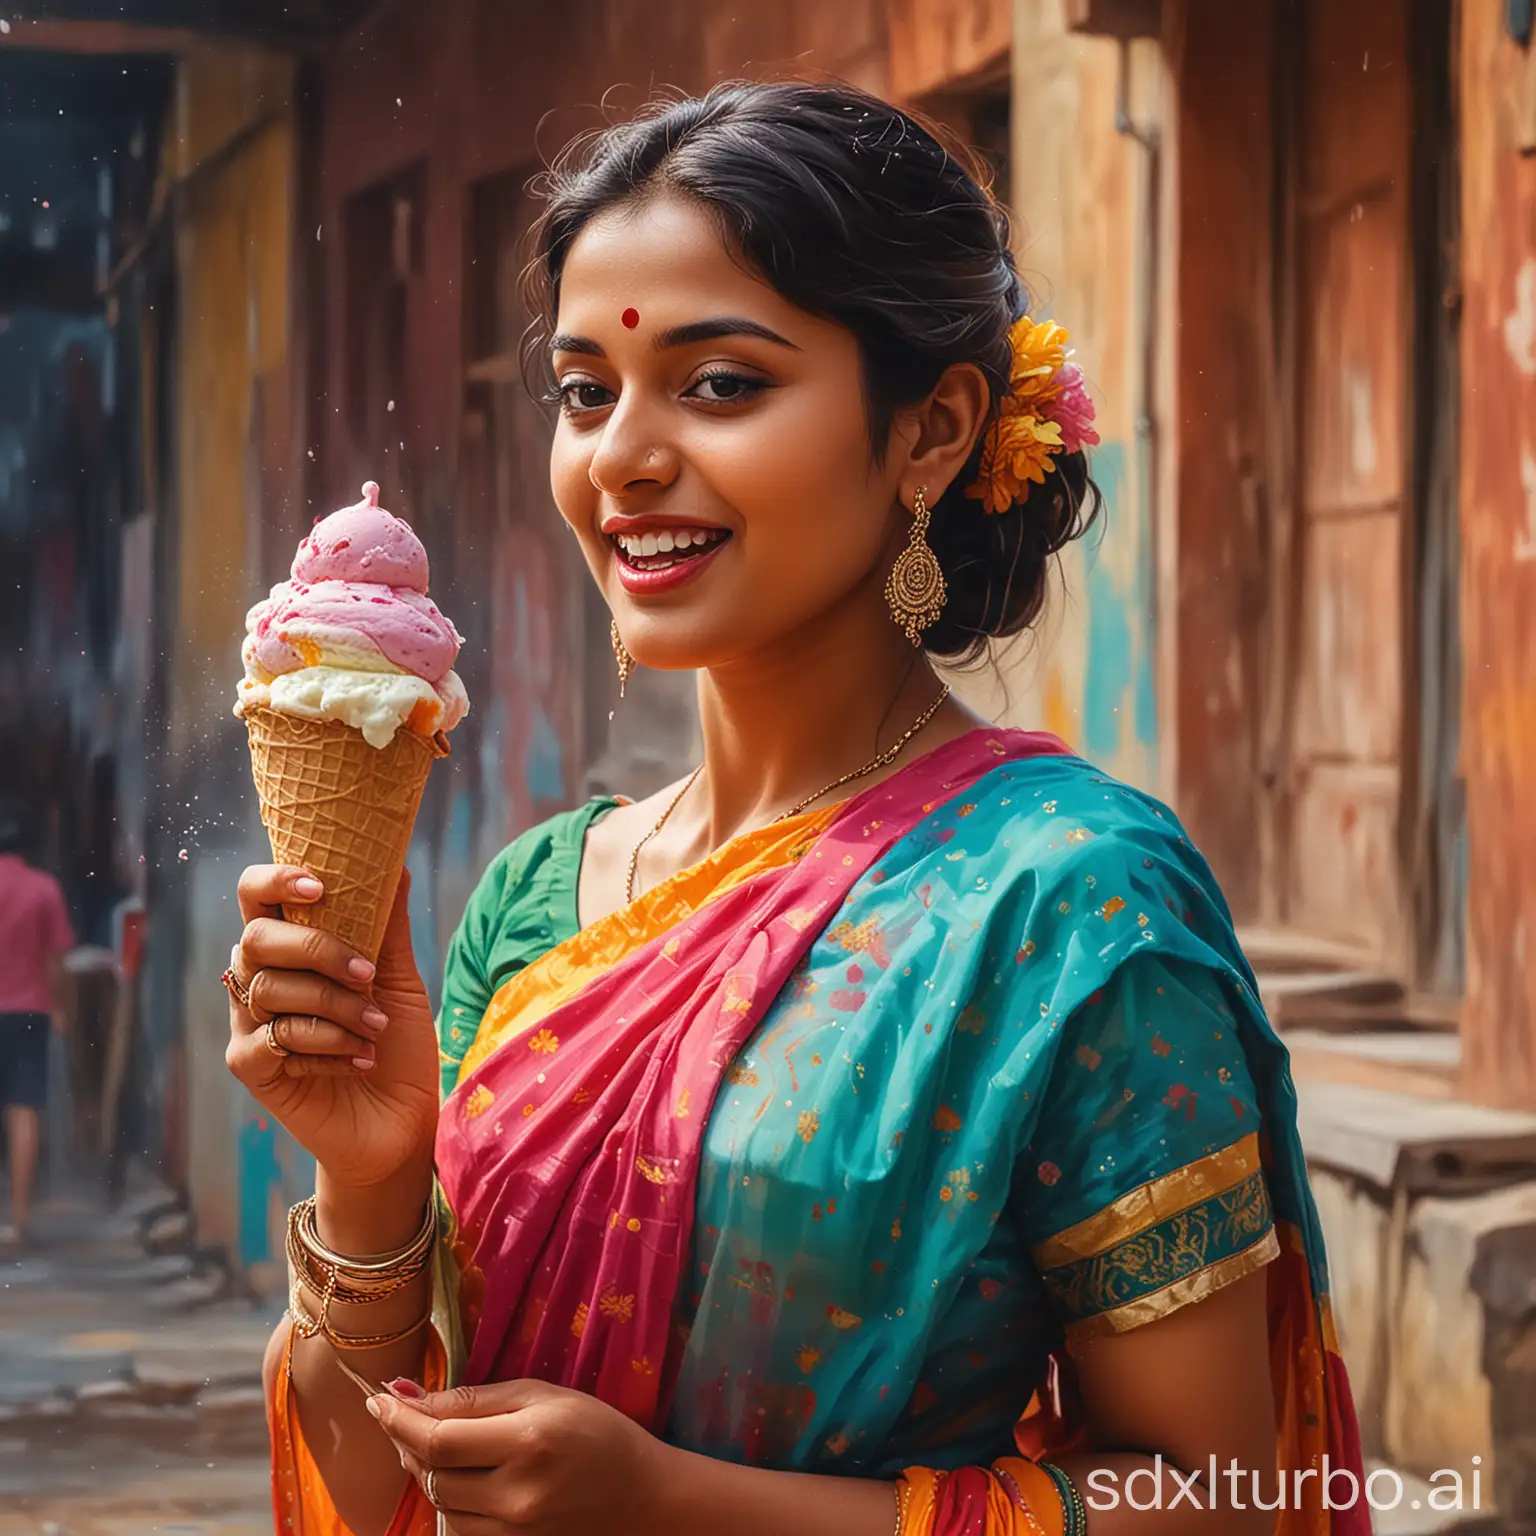 Indian-Lady-in-Saree-Enjoying-Ice-Cream-with-Vibrant-Motion